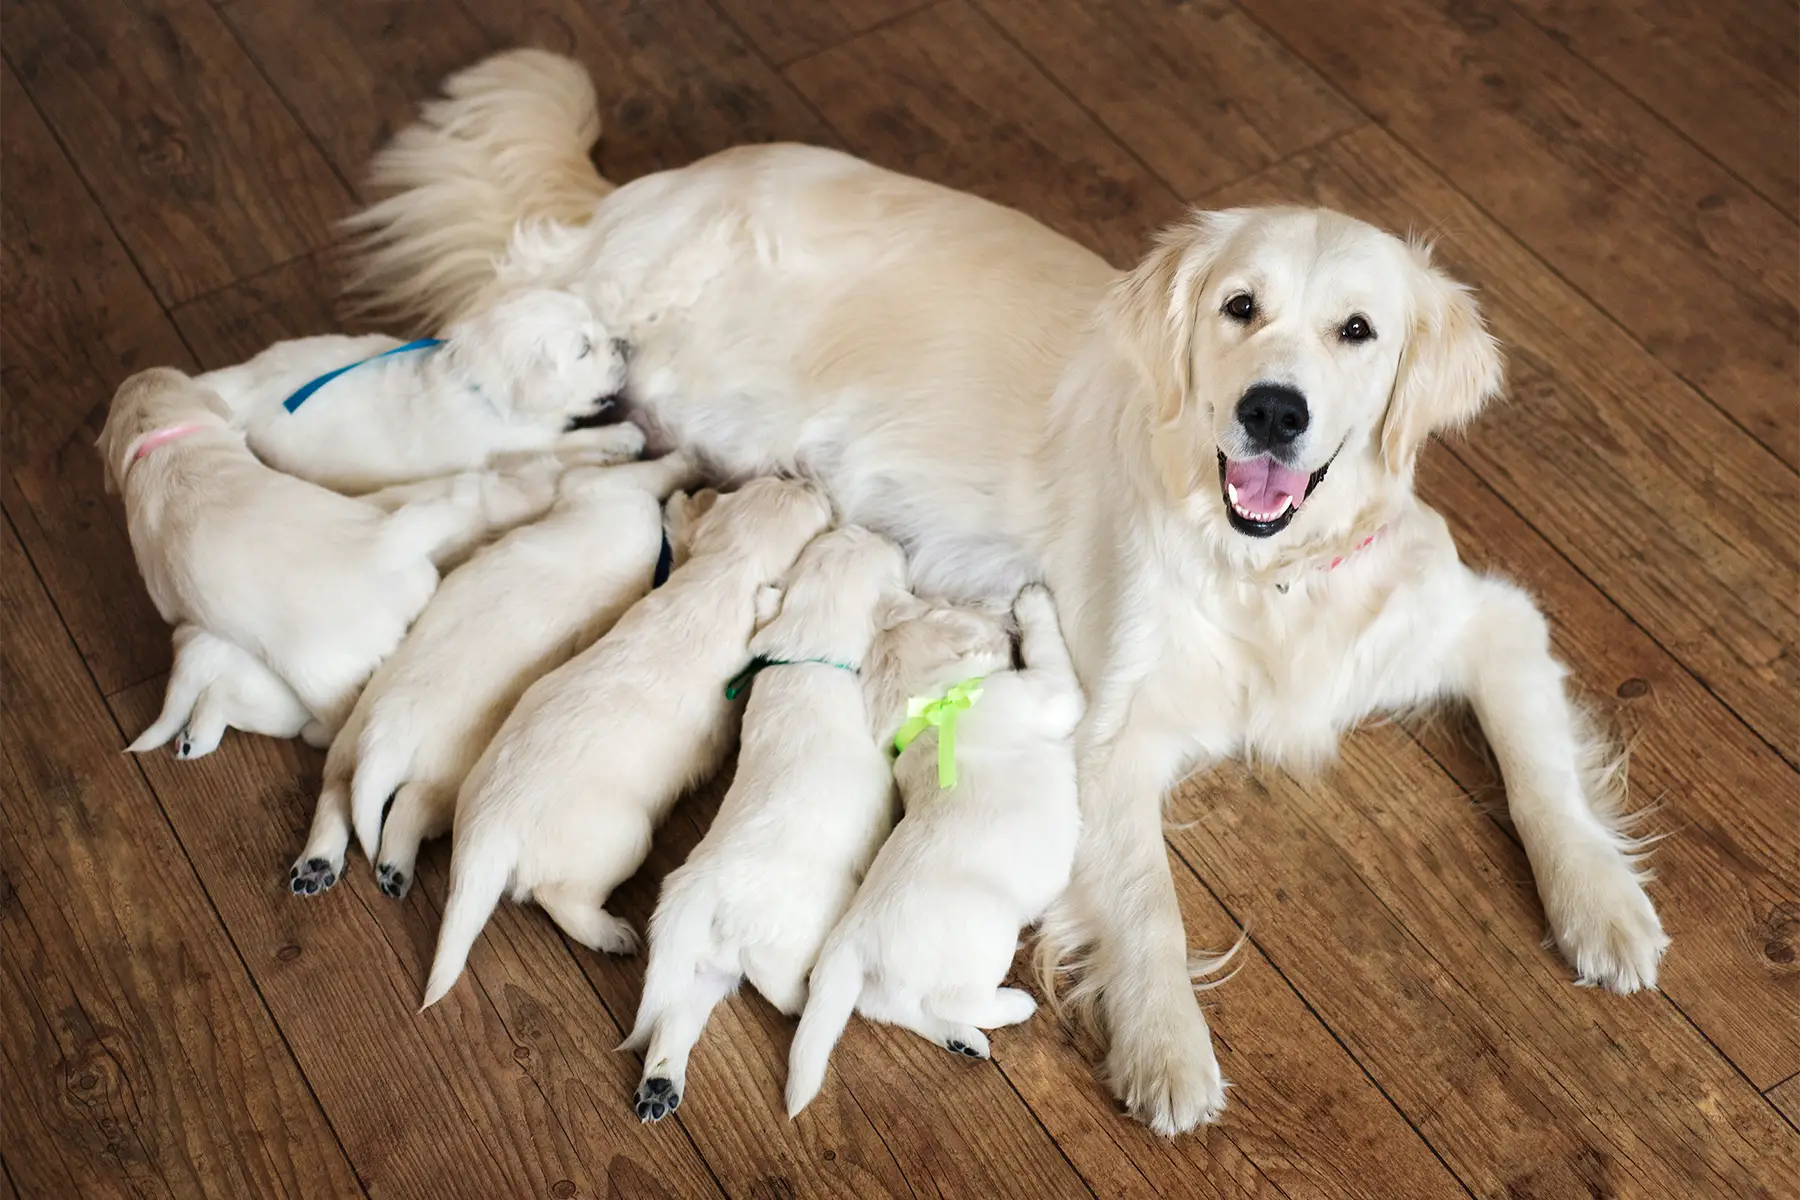 a female dog feeding her litter of puppies